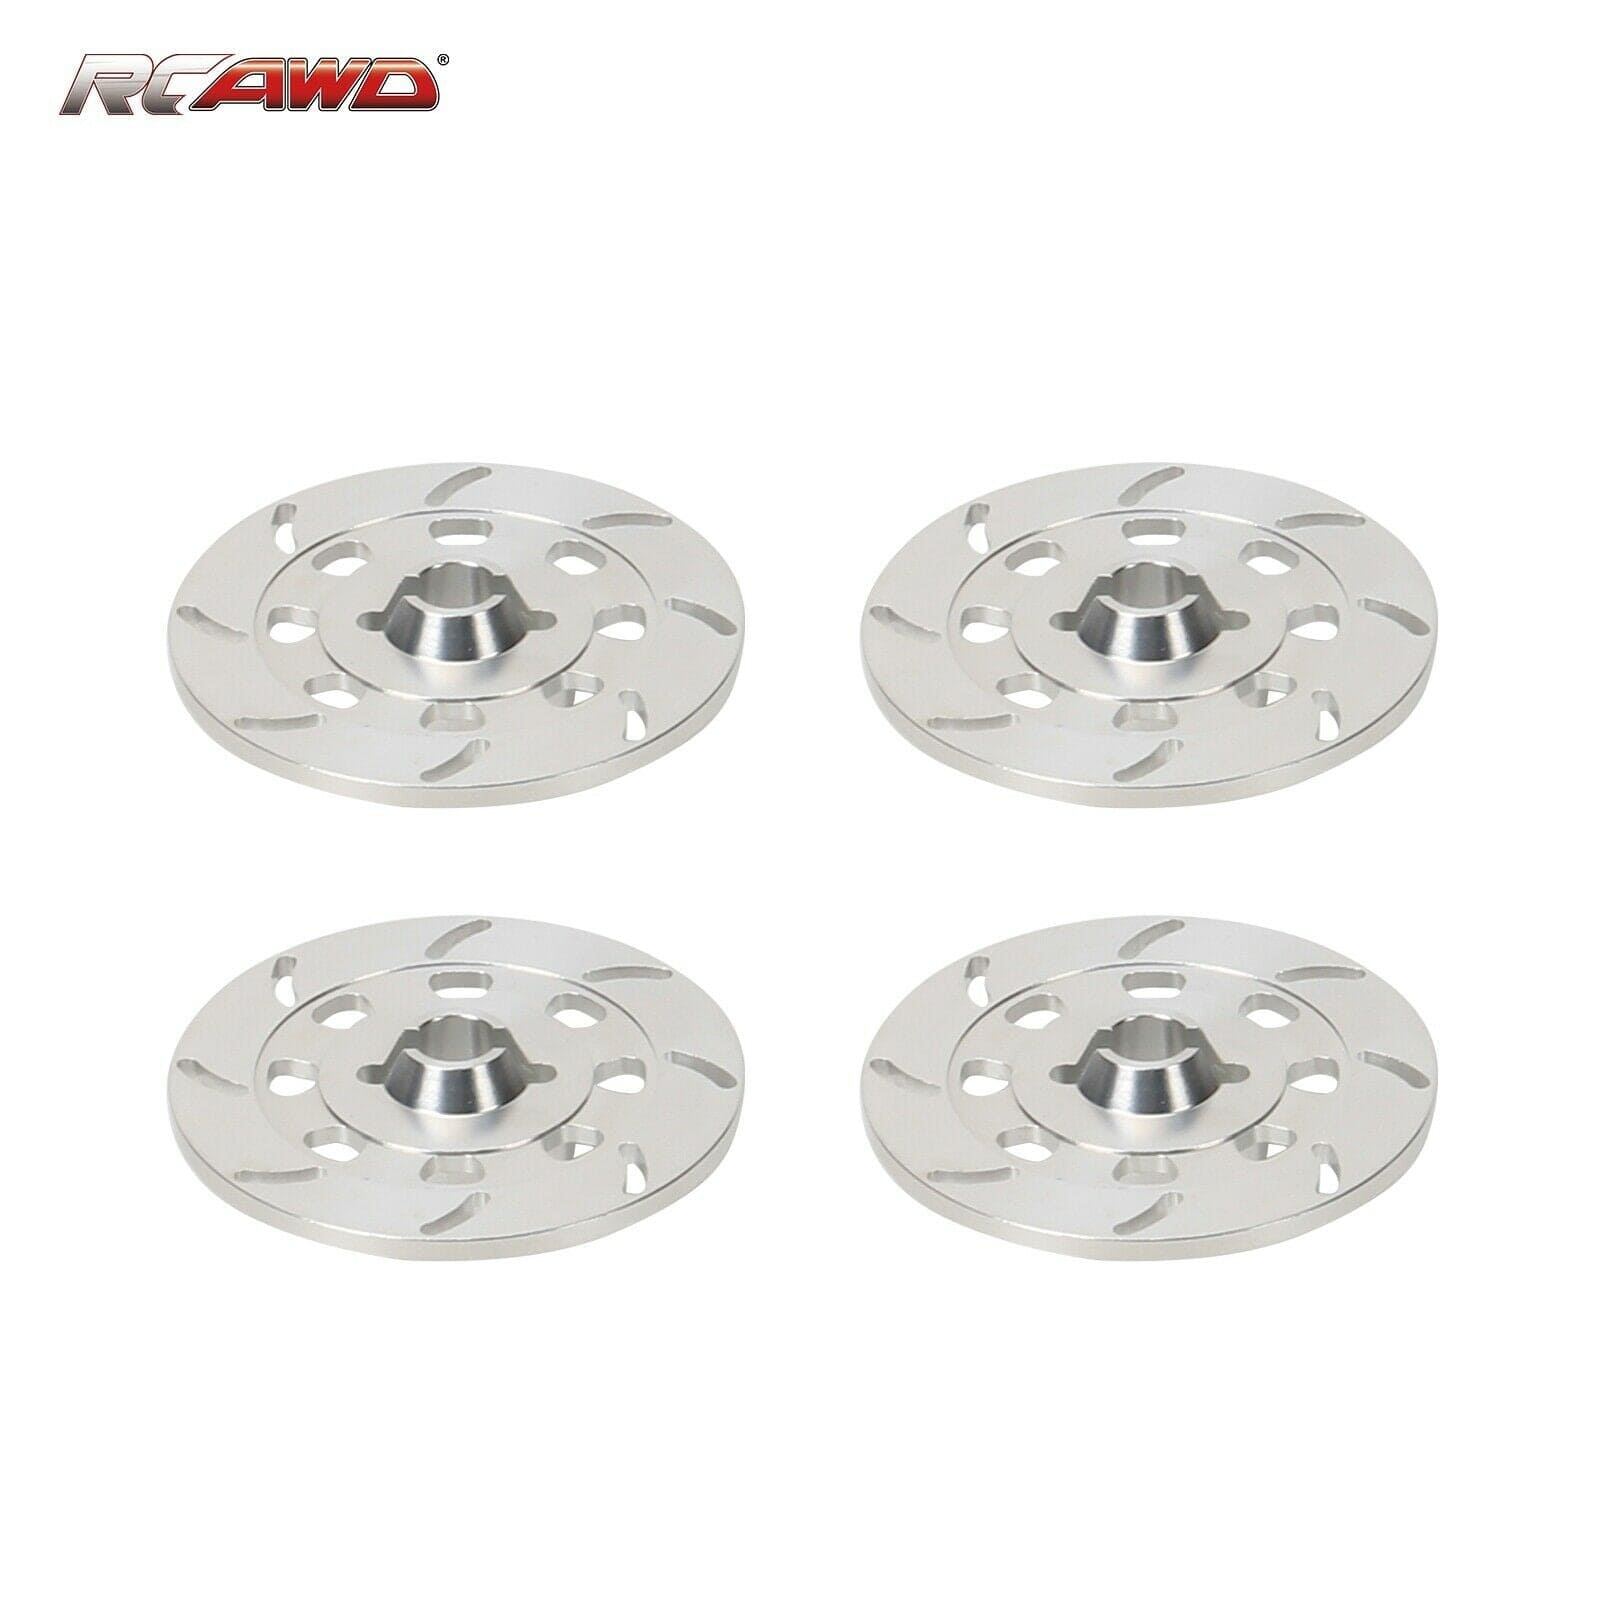 RCAWD Traxxas UDR Unlimited Desert Racer Wheel Disc Brake Rotors 8569 - RCAWD